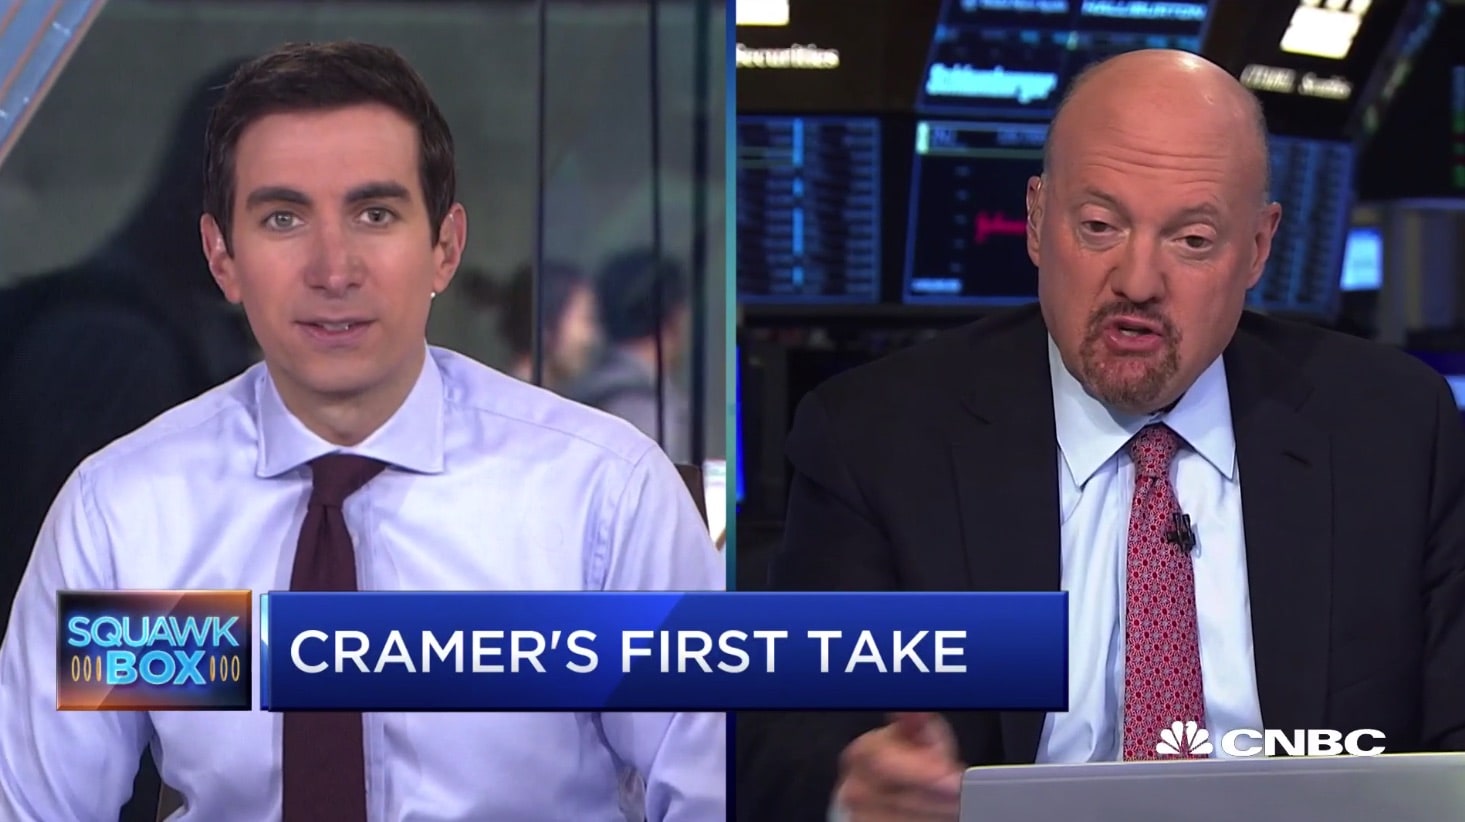 Apple stock could rise, according to analyst Jim Cramer.